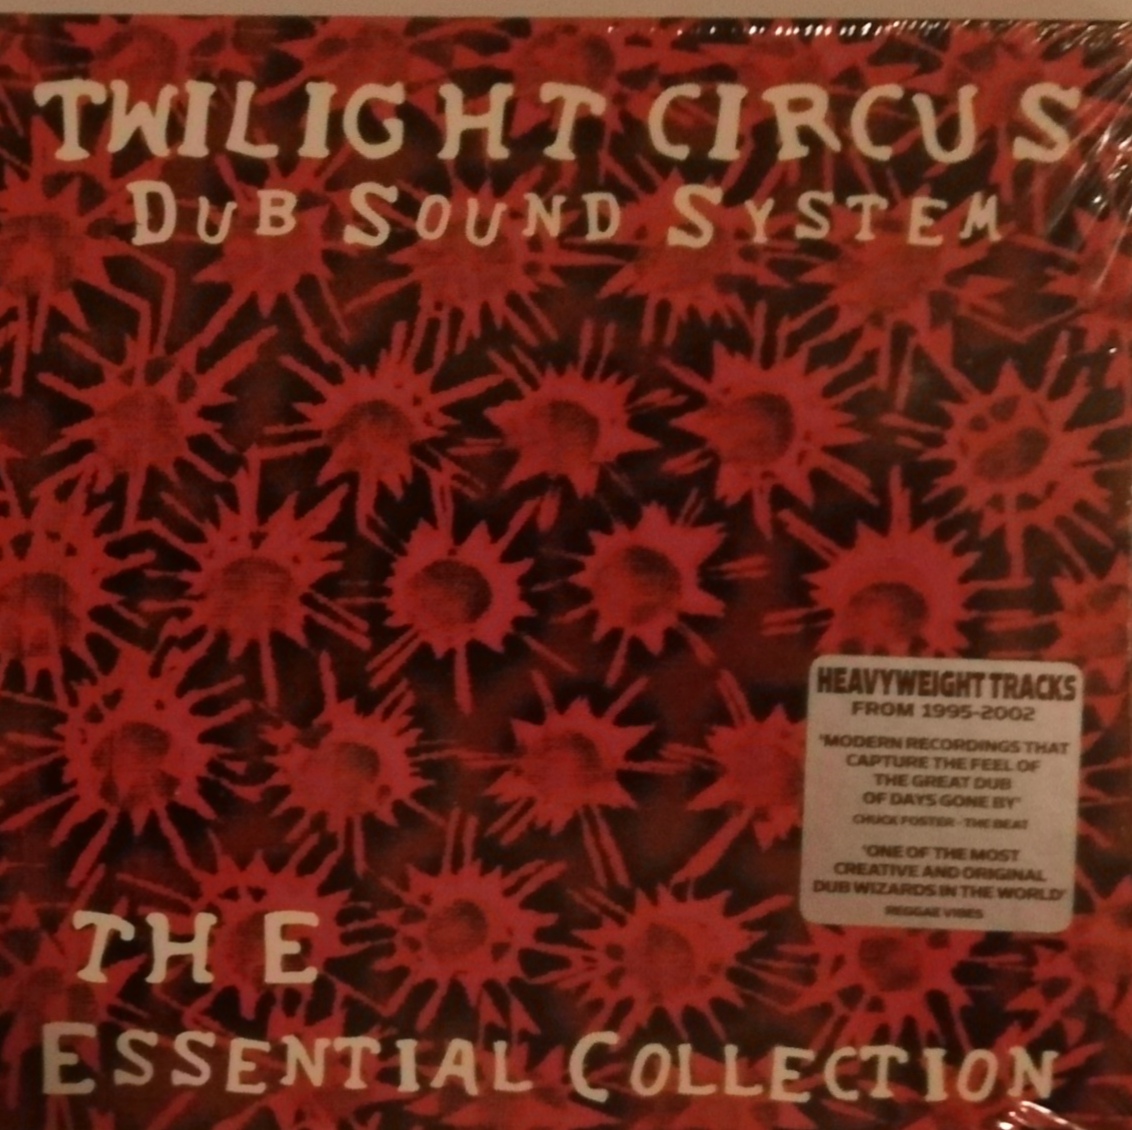 CD TWILIGHT CIRCUS - THE ESSENTIAL COLLECTION